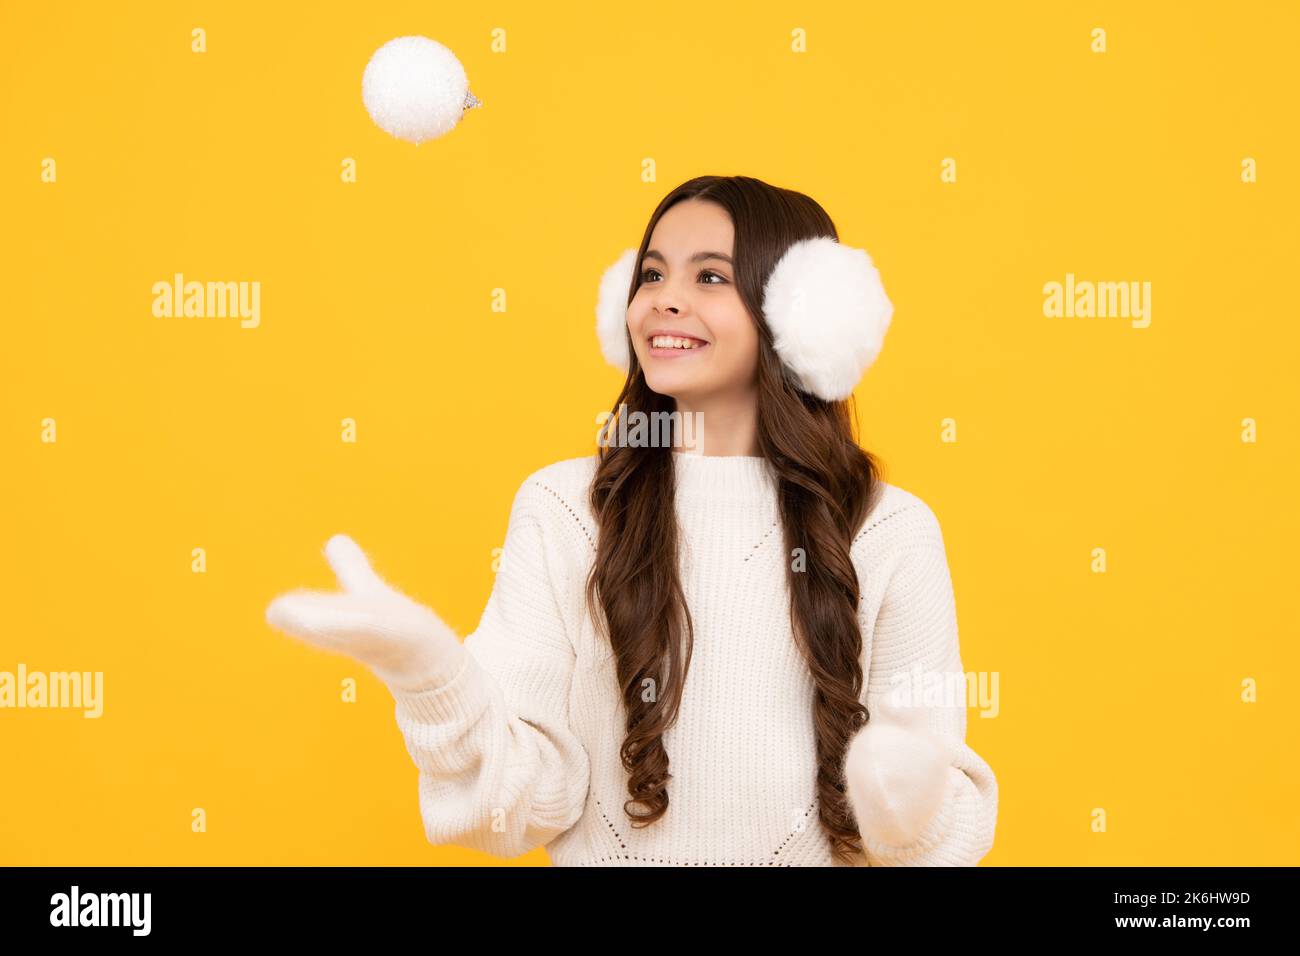 Merry christmas and happy New year. Kid in winter clothes. Teen girl with decorative snow ball. Stock Photo